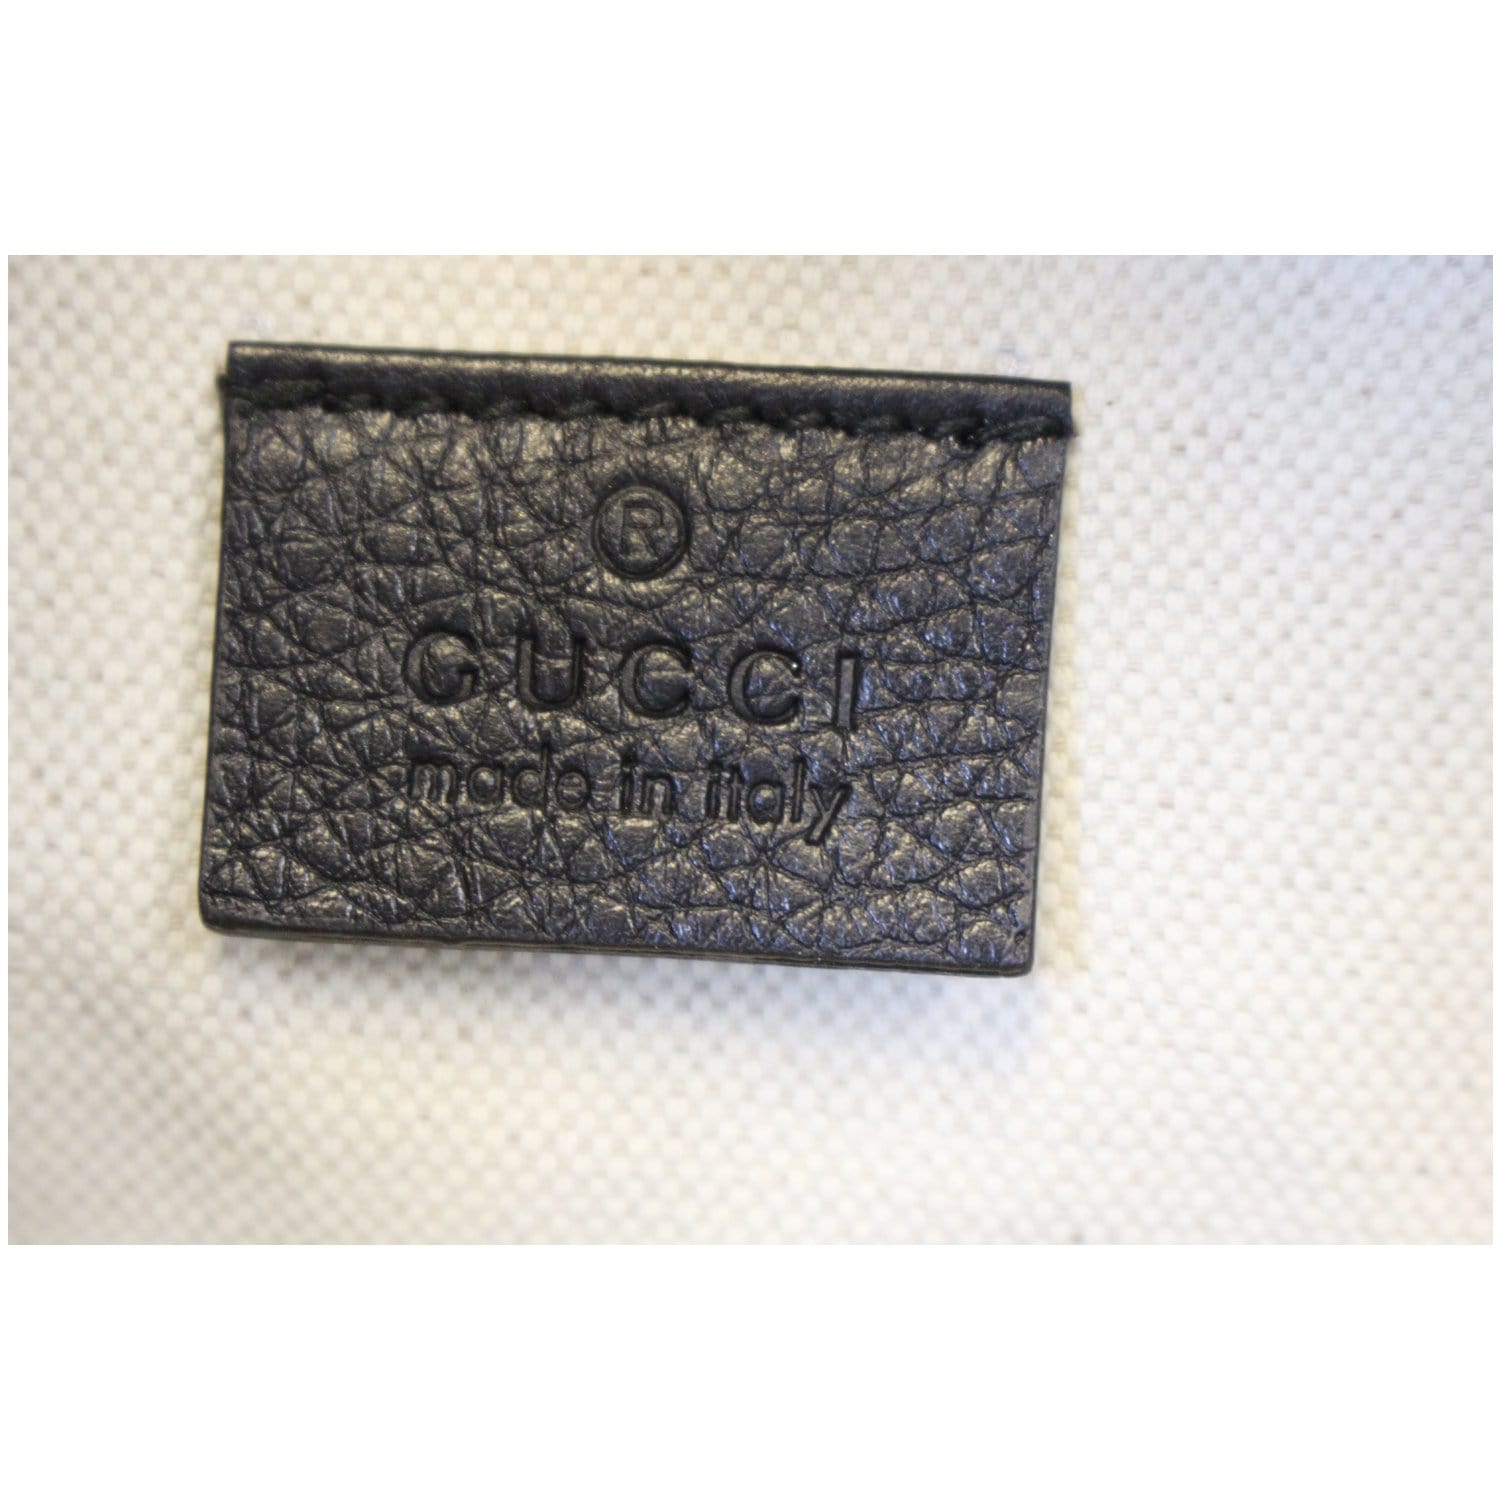 Gucci, Accessories, Gucci Belt Large Ggsize 8 Serial Number 40946 493949